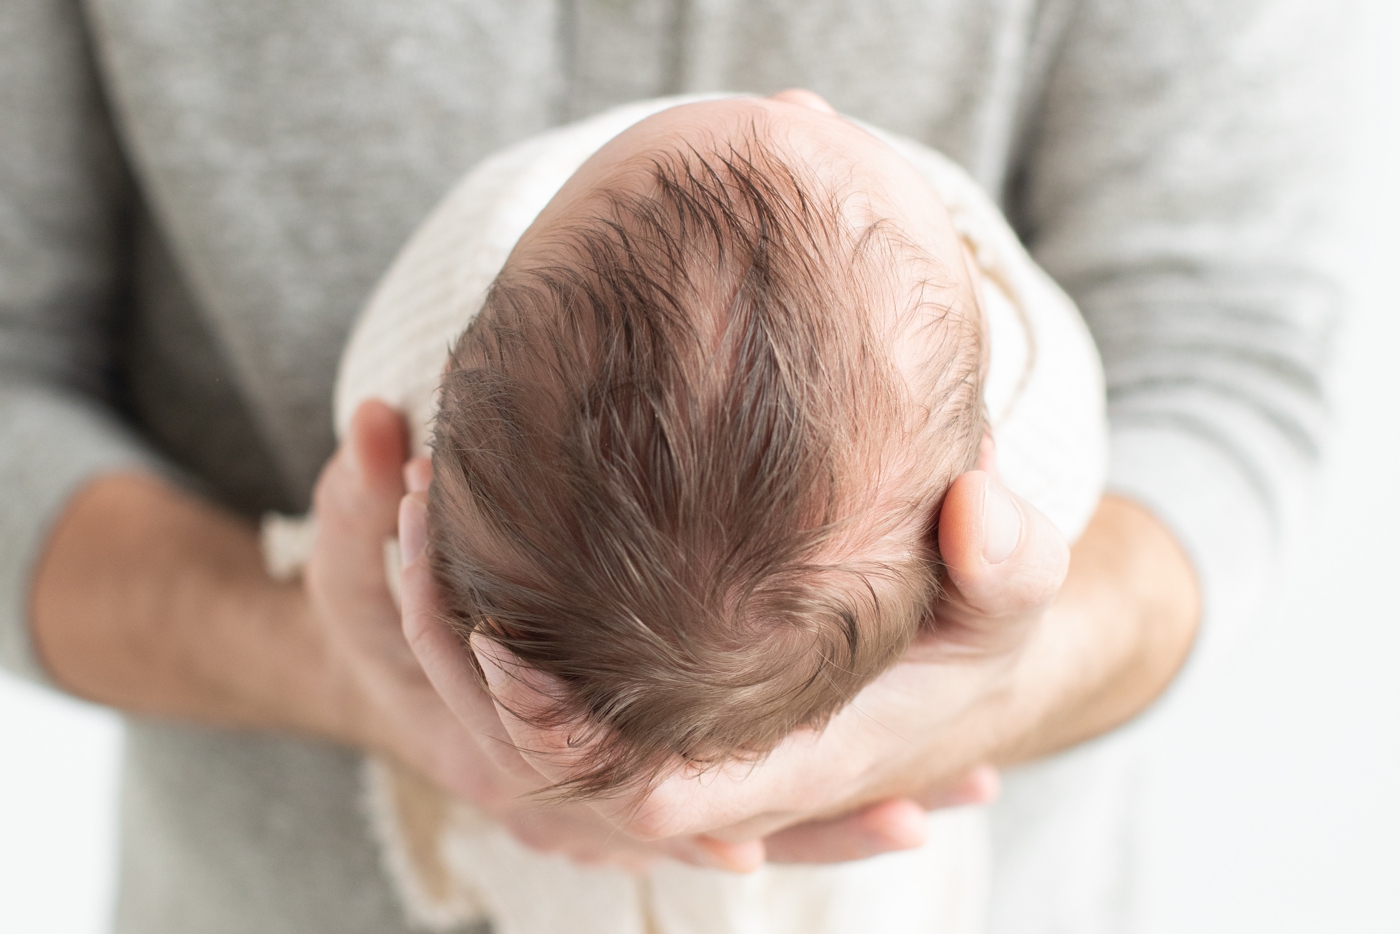 Closeup of newborn baby's hair while Dad holds him. Photo by Sana Ahmed Photography.